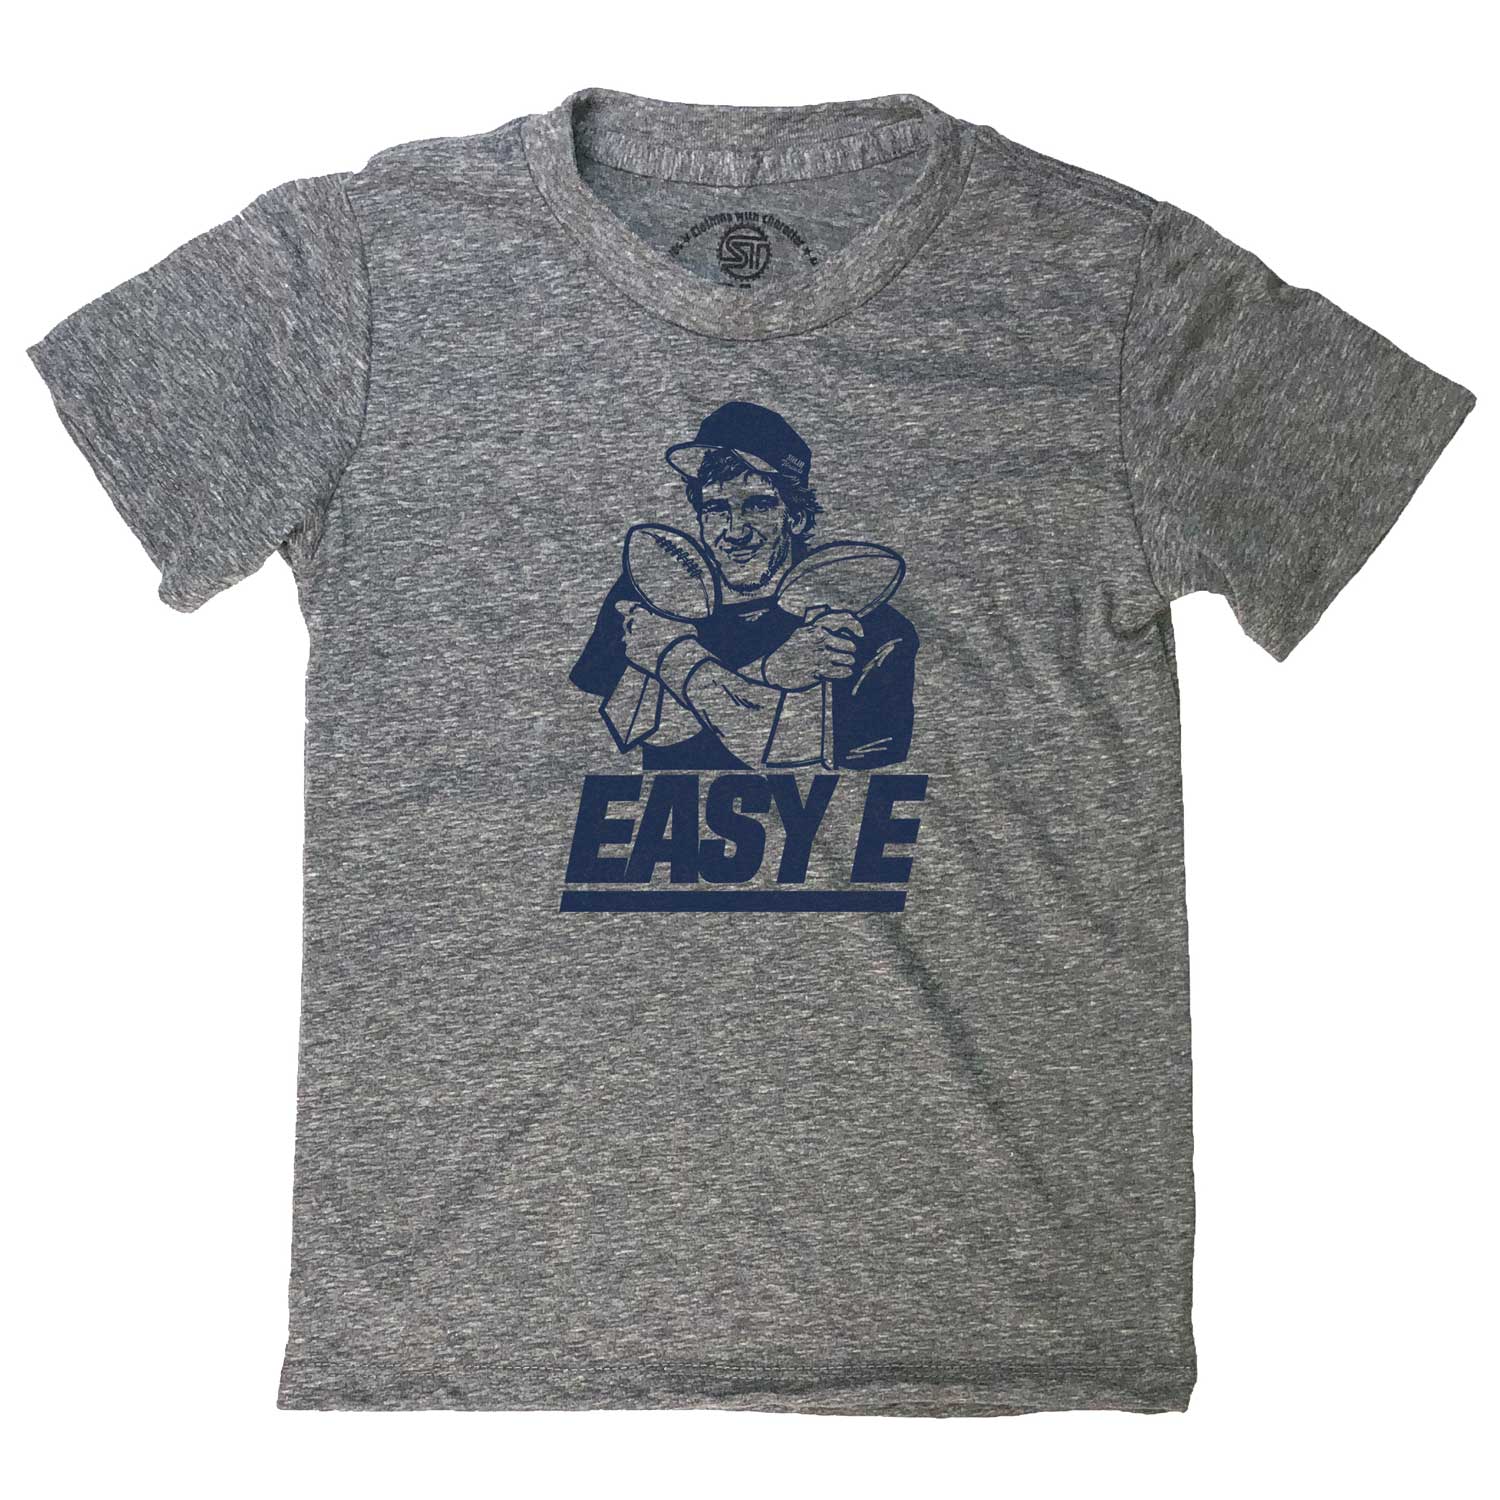 Kid's Easy E Retro Football Graphic Tee | Funny NY Giants Eli Manning Soft T-Shirt | SOLID THREADS